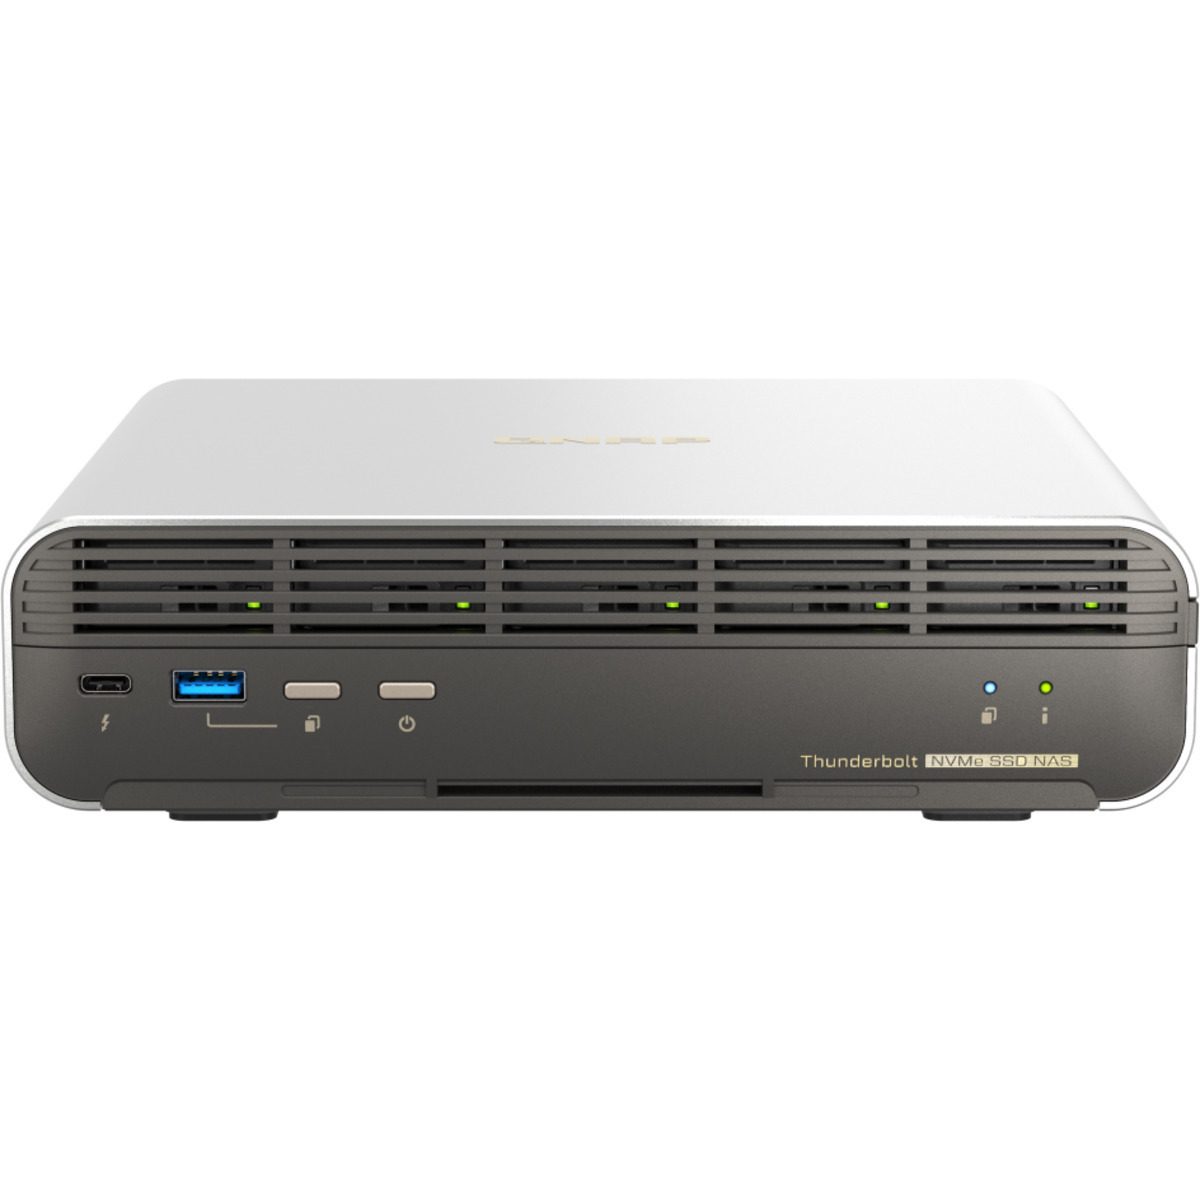 QNAP TBS-h574TX Core i3 Thunderbolt 4 3tb 5-Bay Desktop Multimedia / Power User / Business DAS-NAS - Combo Direct + Network Storage Device 3x1tb Samsung 990 EVO MZ-V9E1T0BW  5000/4200MB/s M.2 2280 NVMe SSD CONSUMER Class Drives Installed - Burn-In Tested TBS-h574TX Core i3 Thunderbolt 4